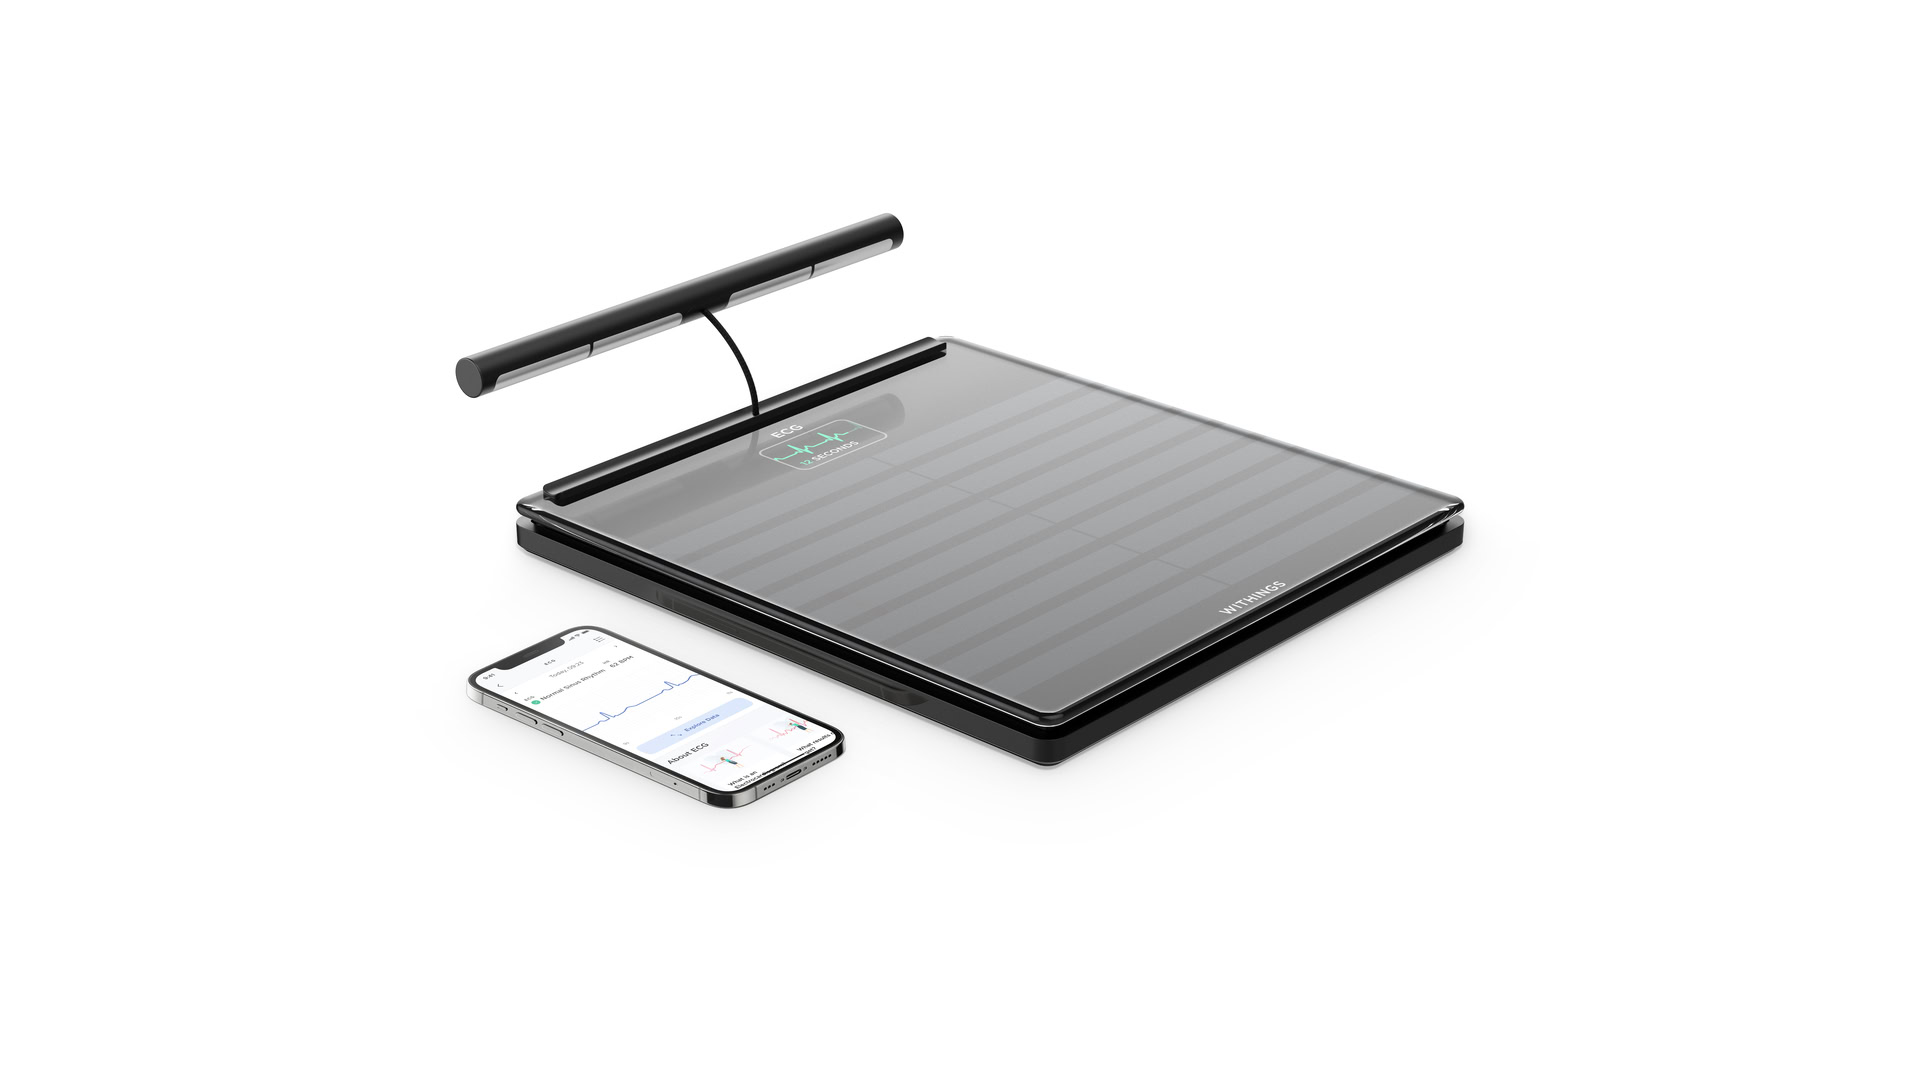 Withings Body Comp smart scale can also measure the health of your